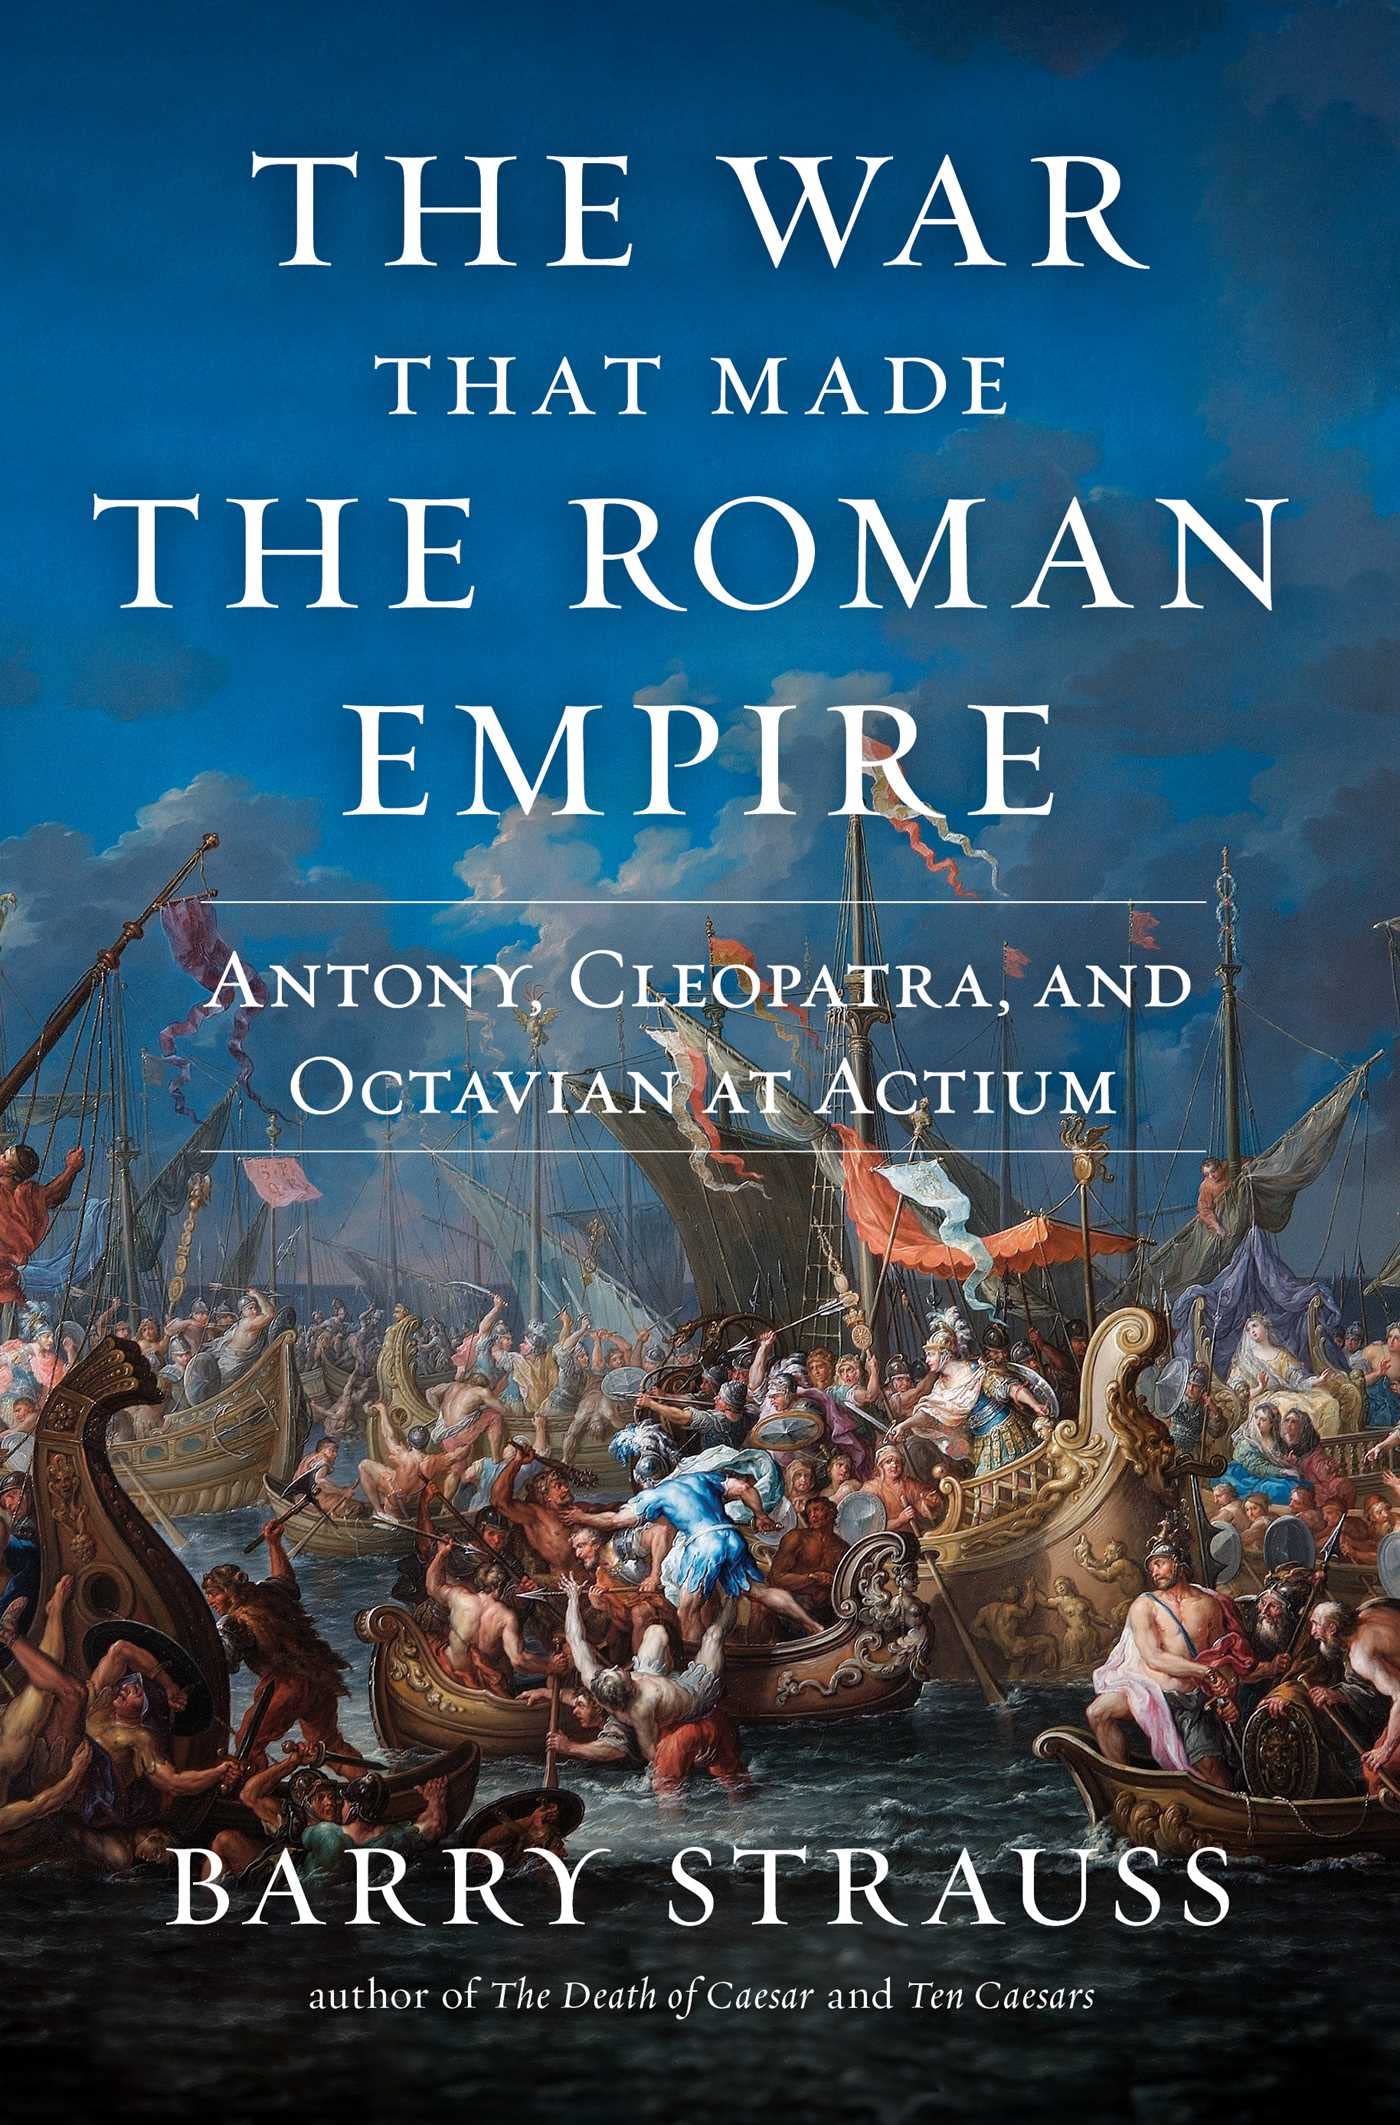 Image for "The War That Made the Roman Empire"